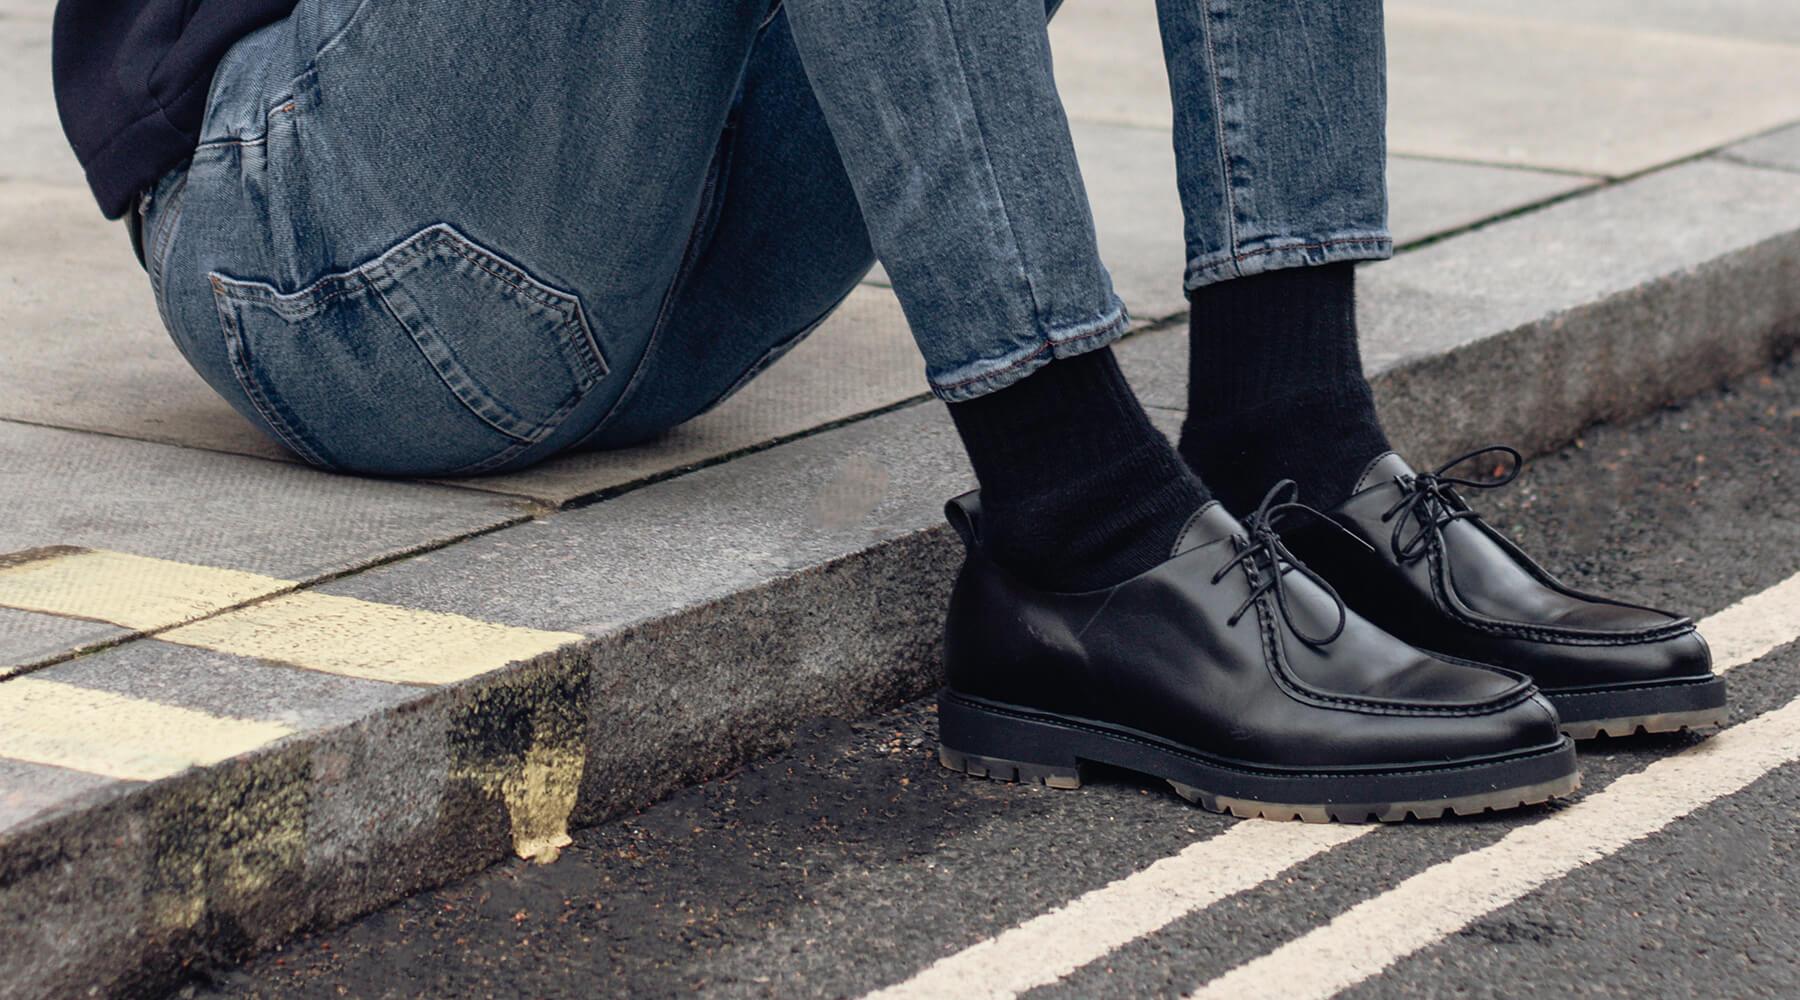 Chunky Sole Shoes - How To Wear This Season | Walk London